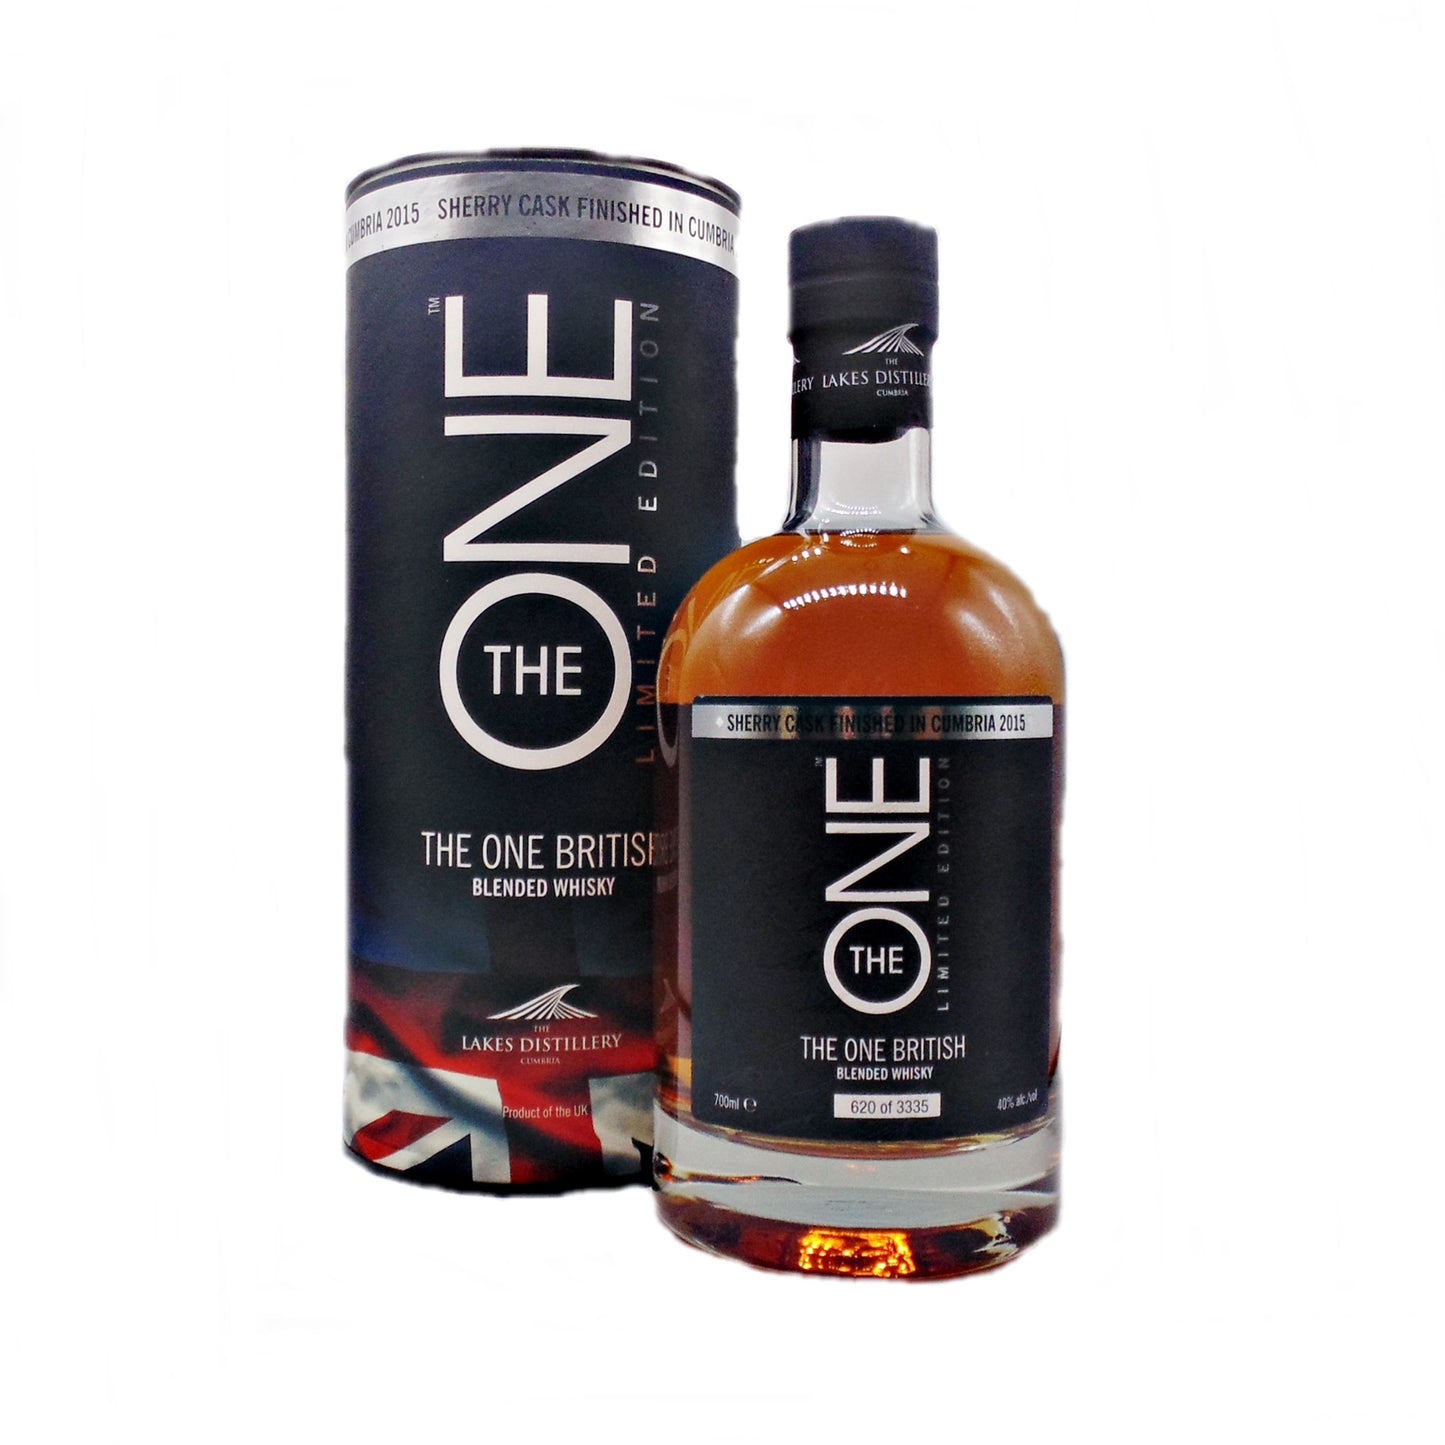 The One British Blended Hogshead Sherry Cask Finish Limited Edition 2015